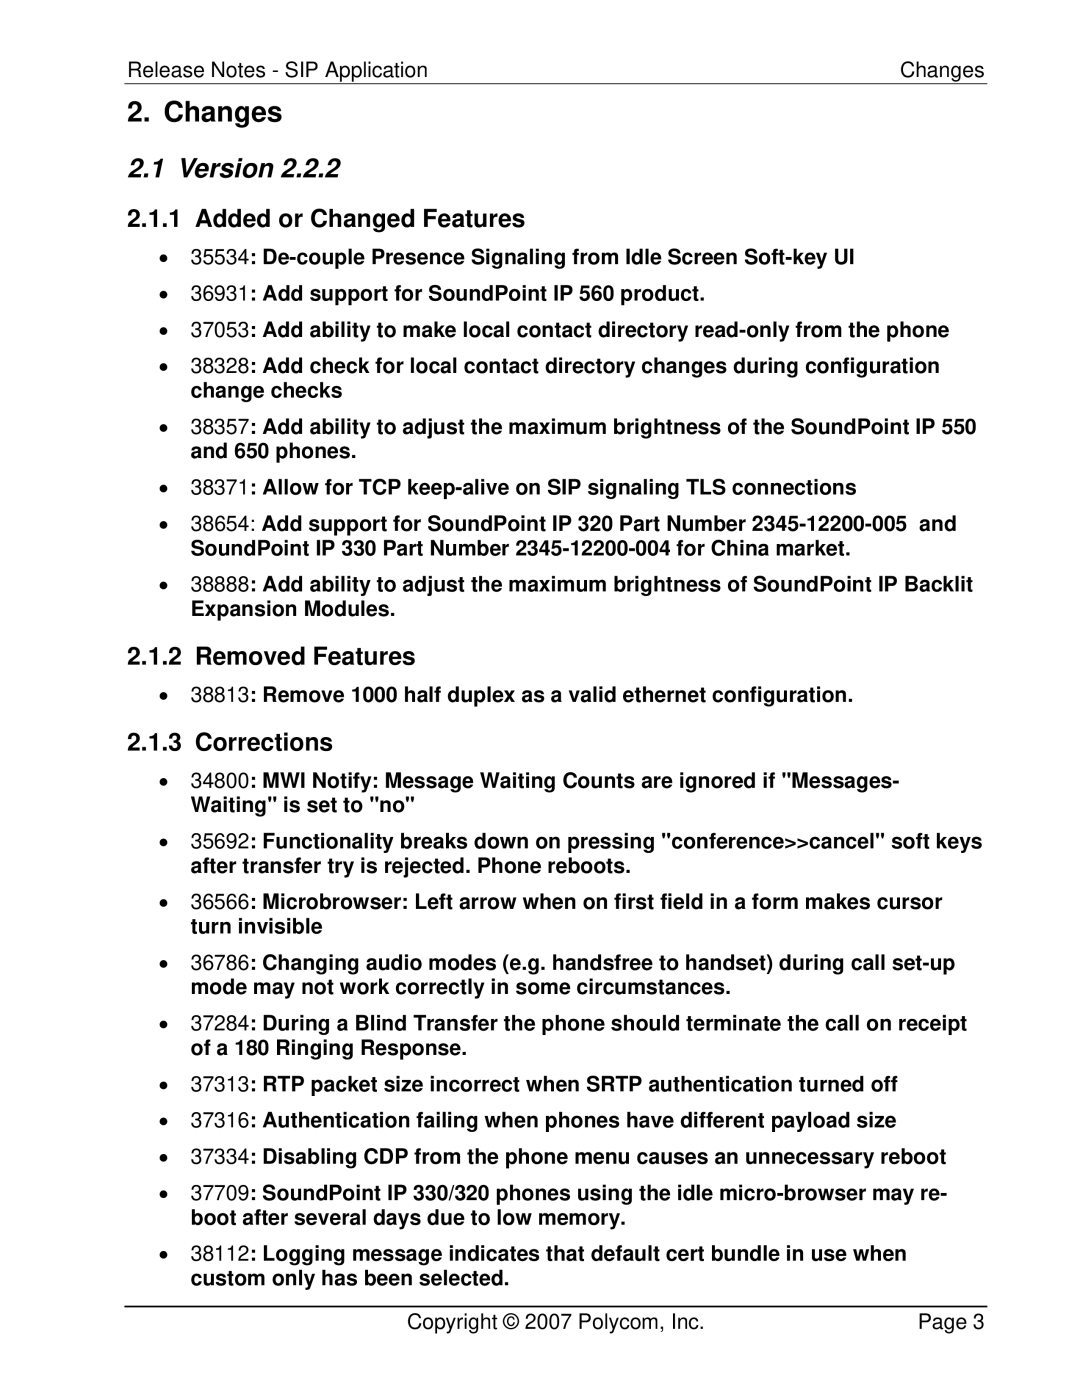 Polycom 3804-11530-222 manual Version, Added or Changed Features, Removed Features, Corrections 